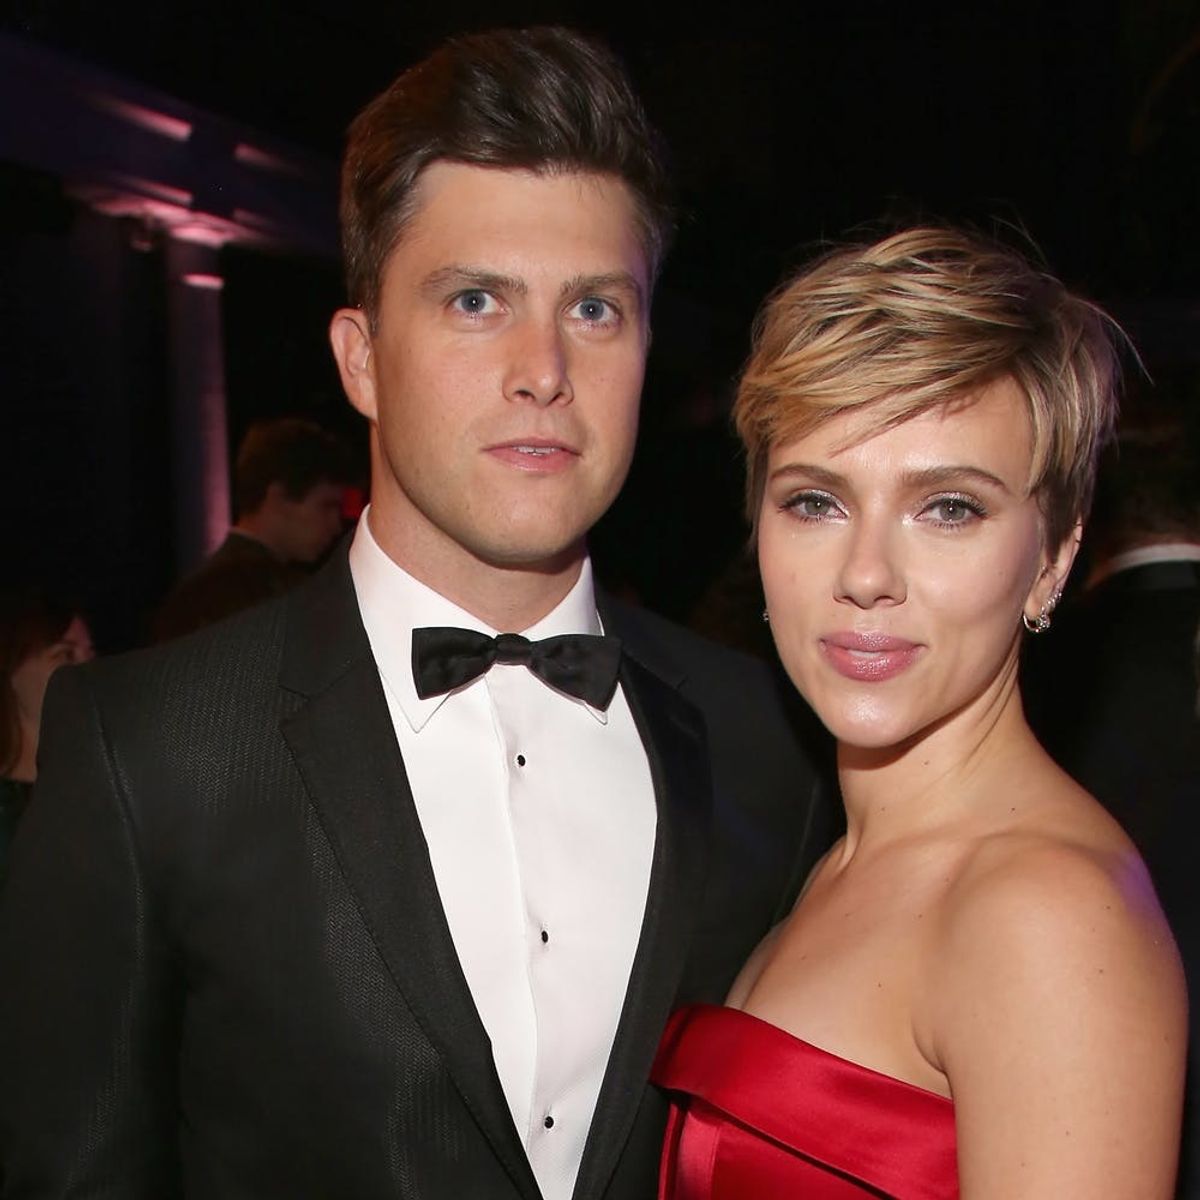 Scarlett Johansson and Colin Jost Make Their First Public Appearance as a Couple